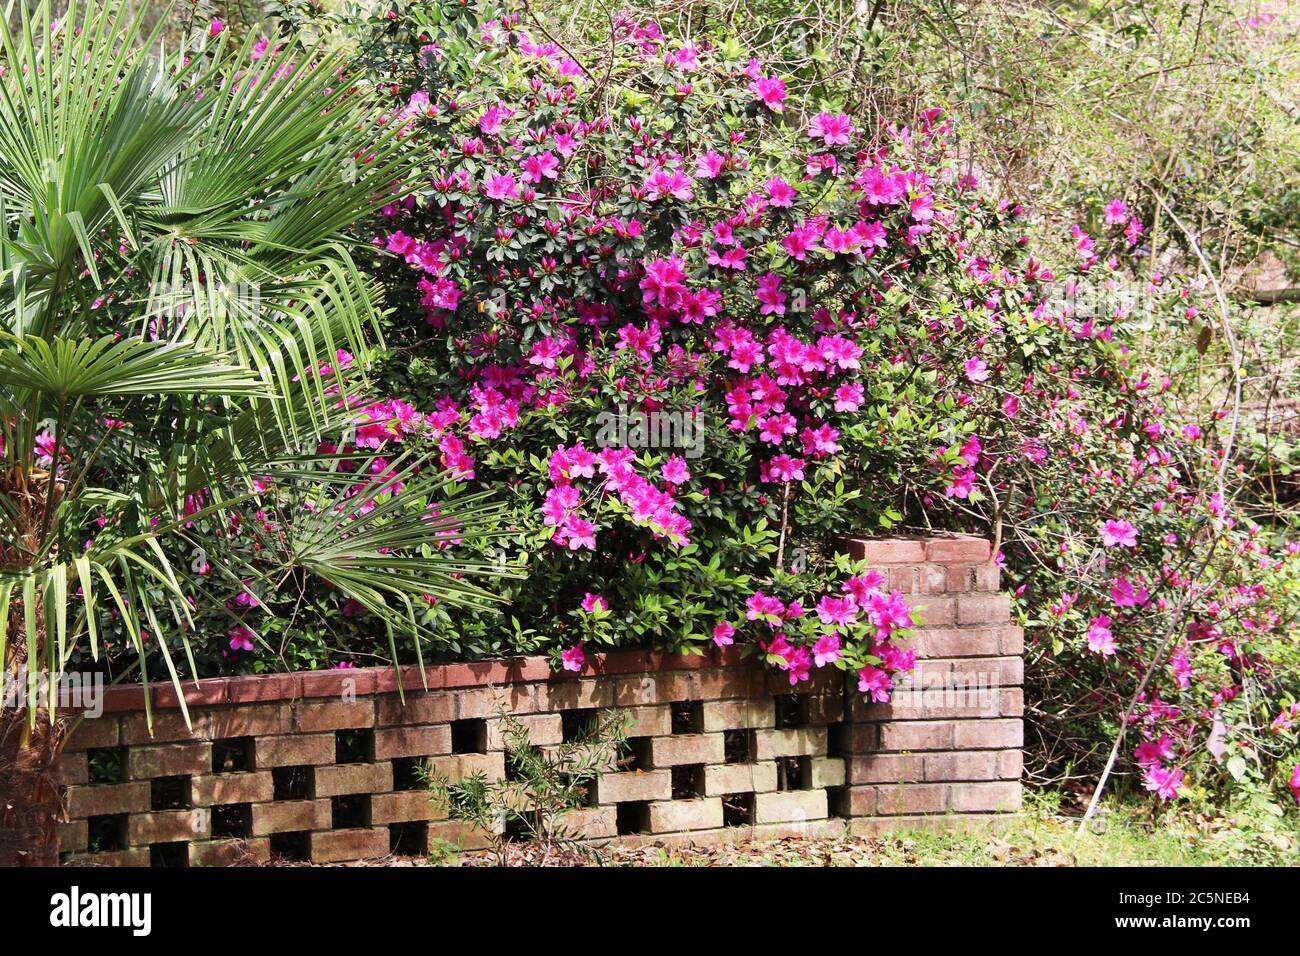 beautiful bougainvillea next to a brick garden wall with purple blooms and palms Stock Photo